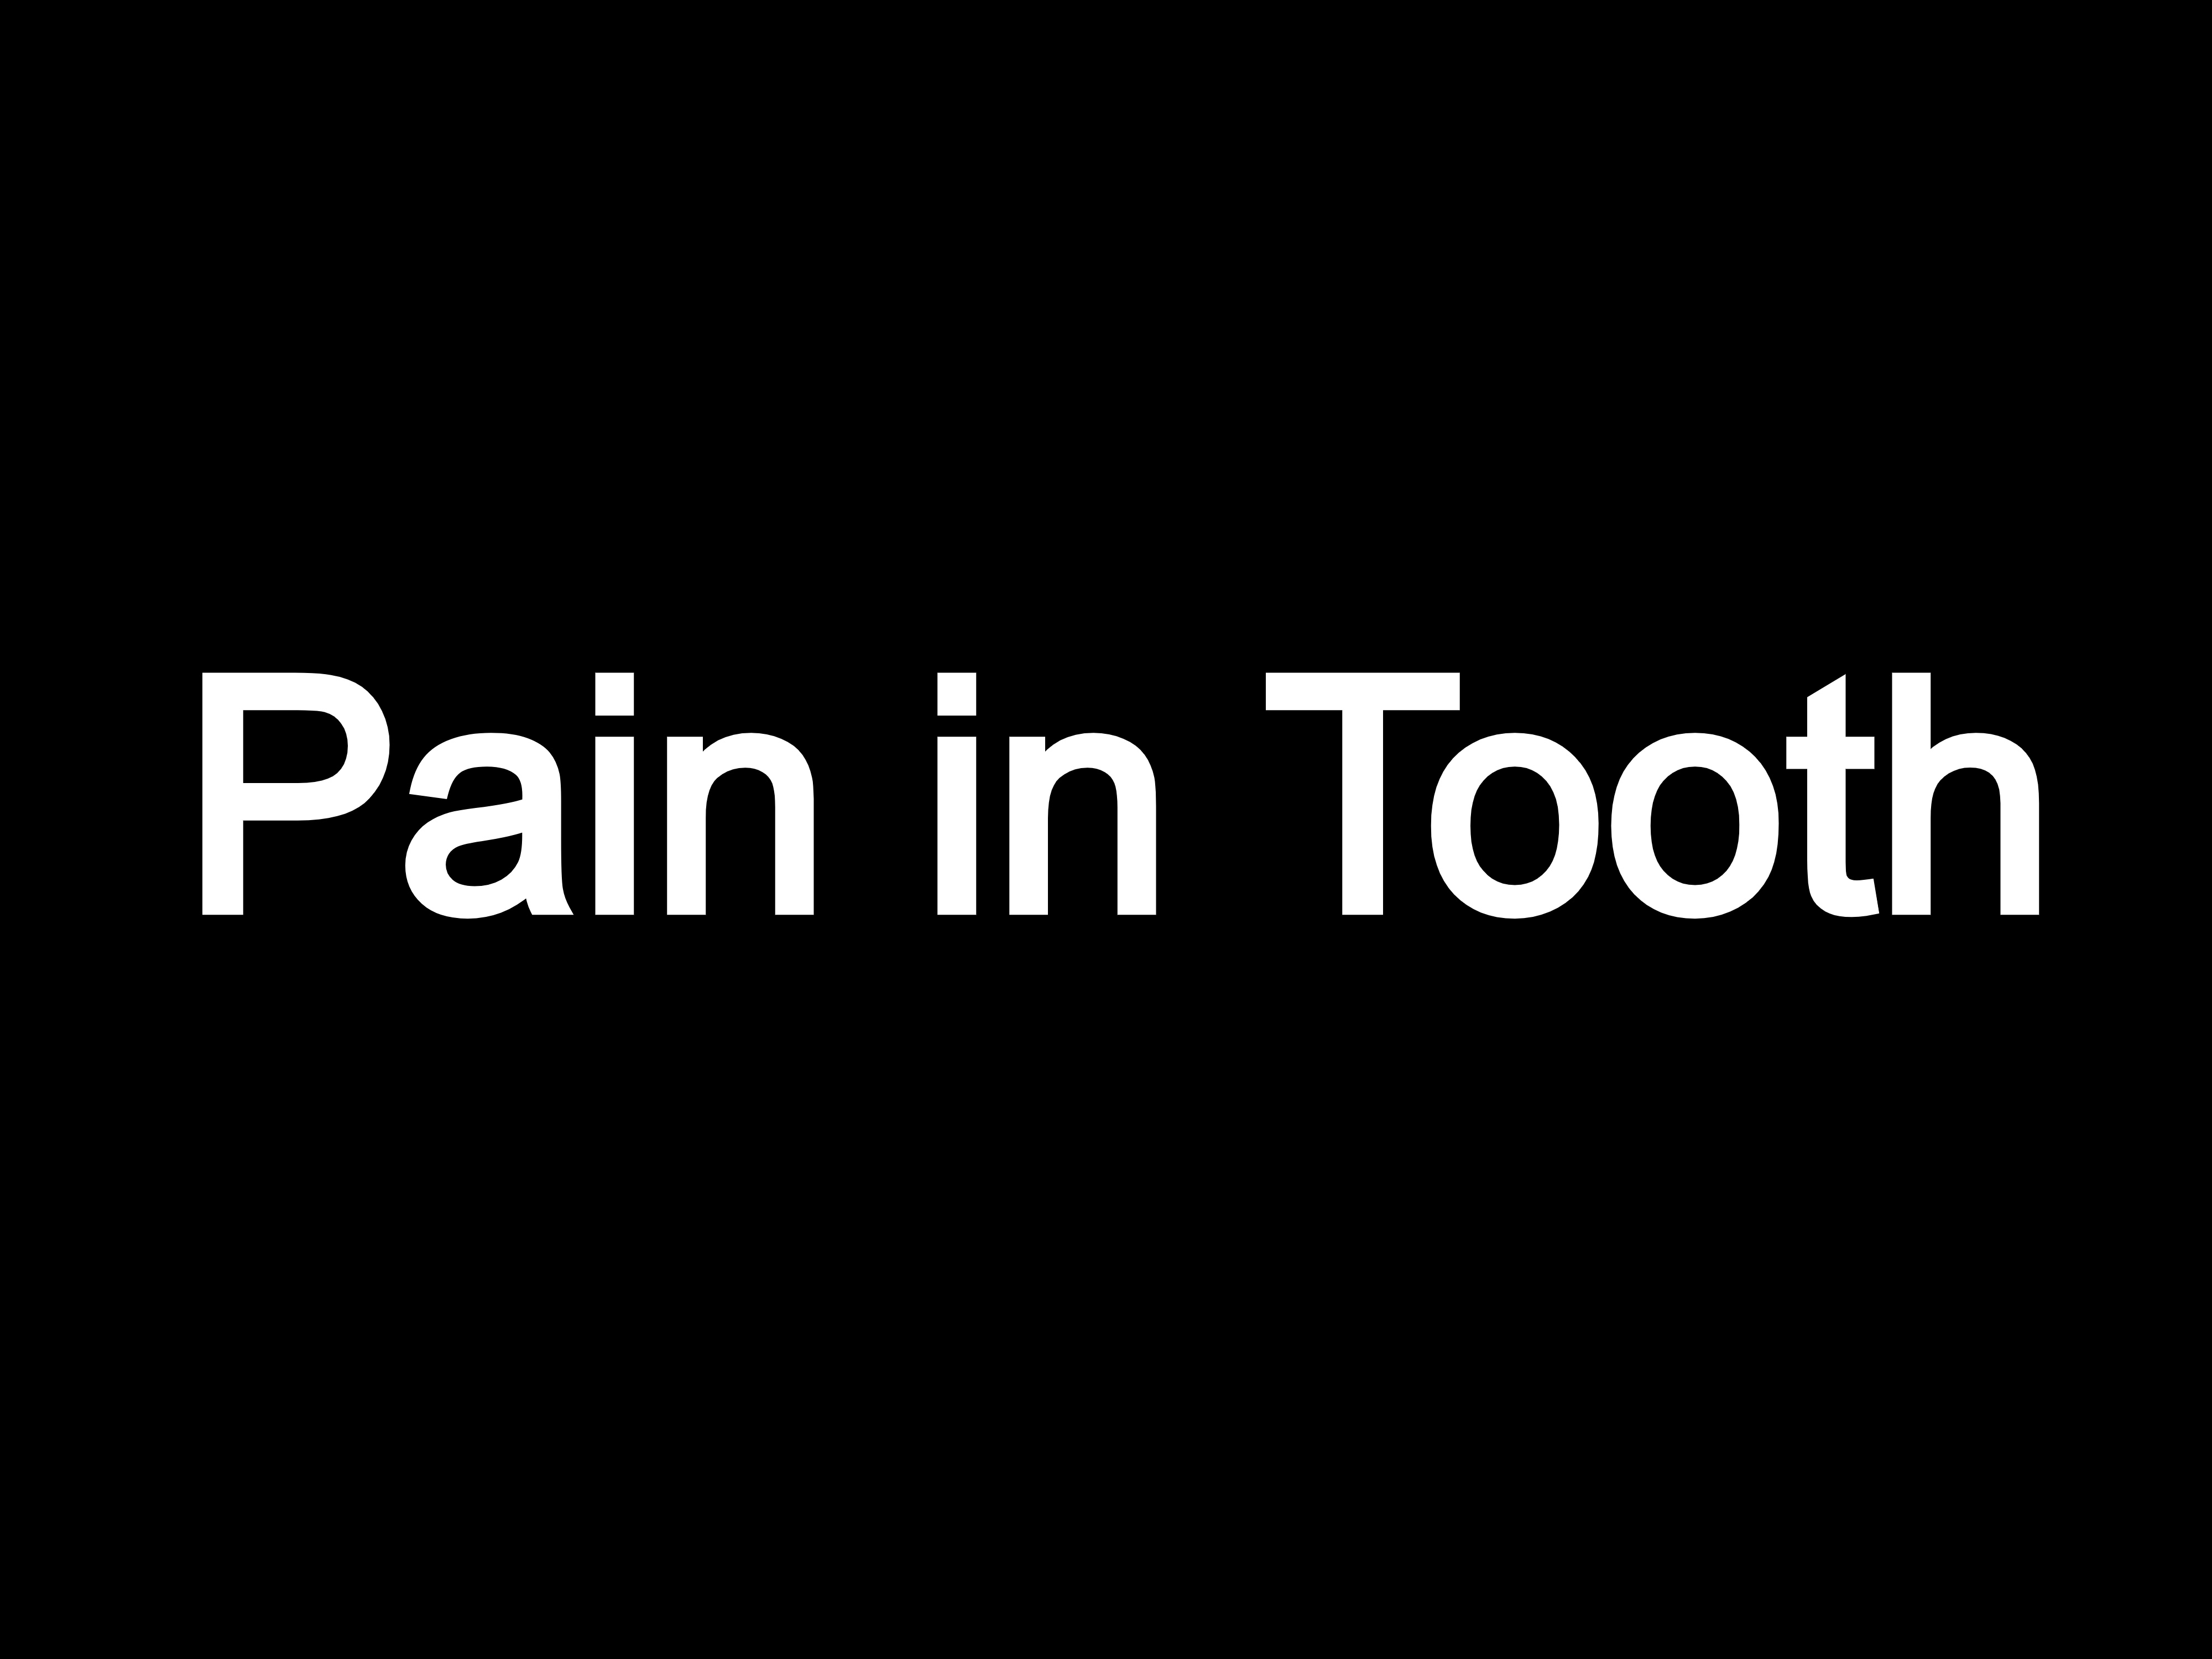  Pain in Tooth